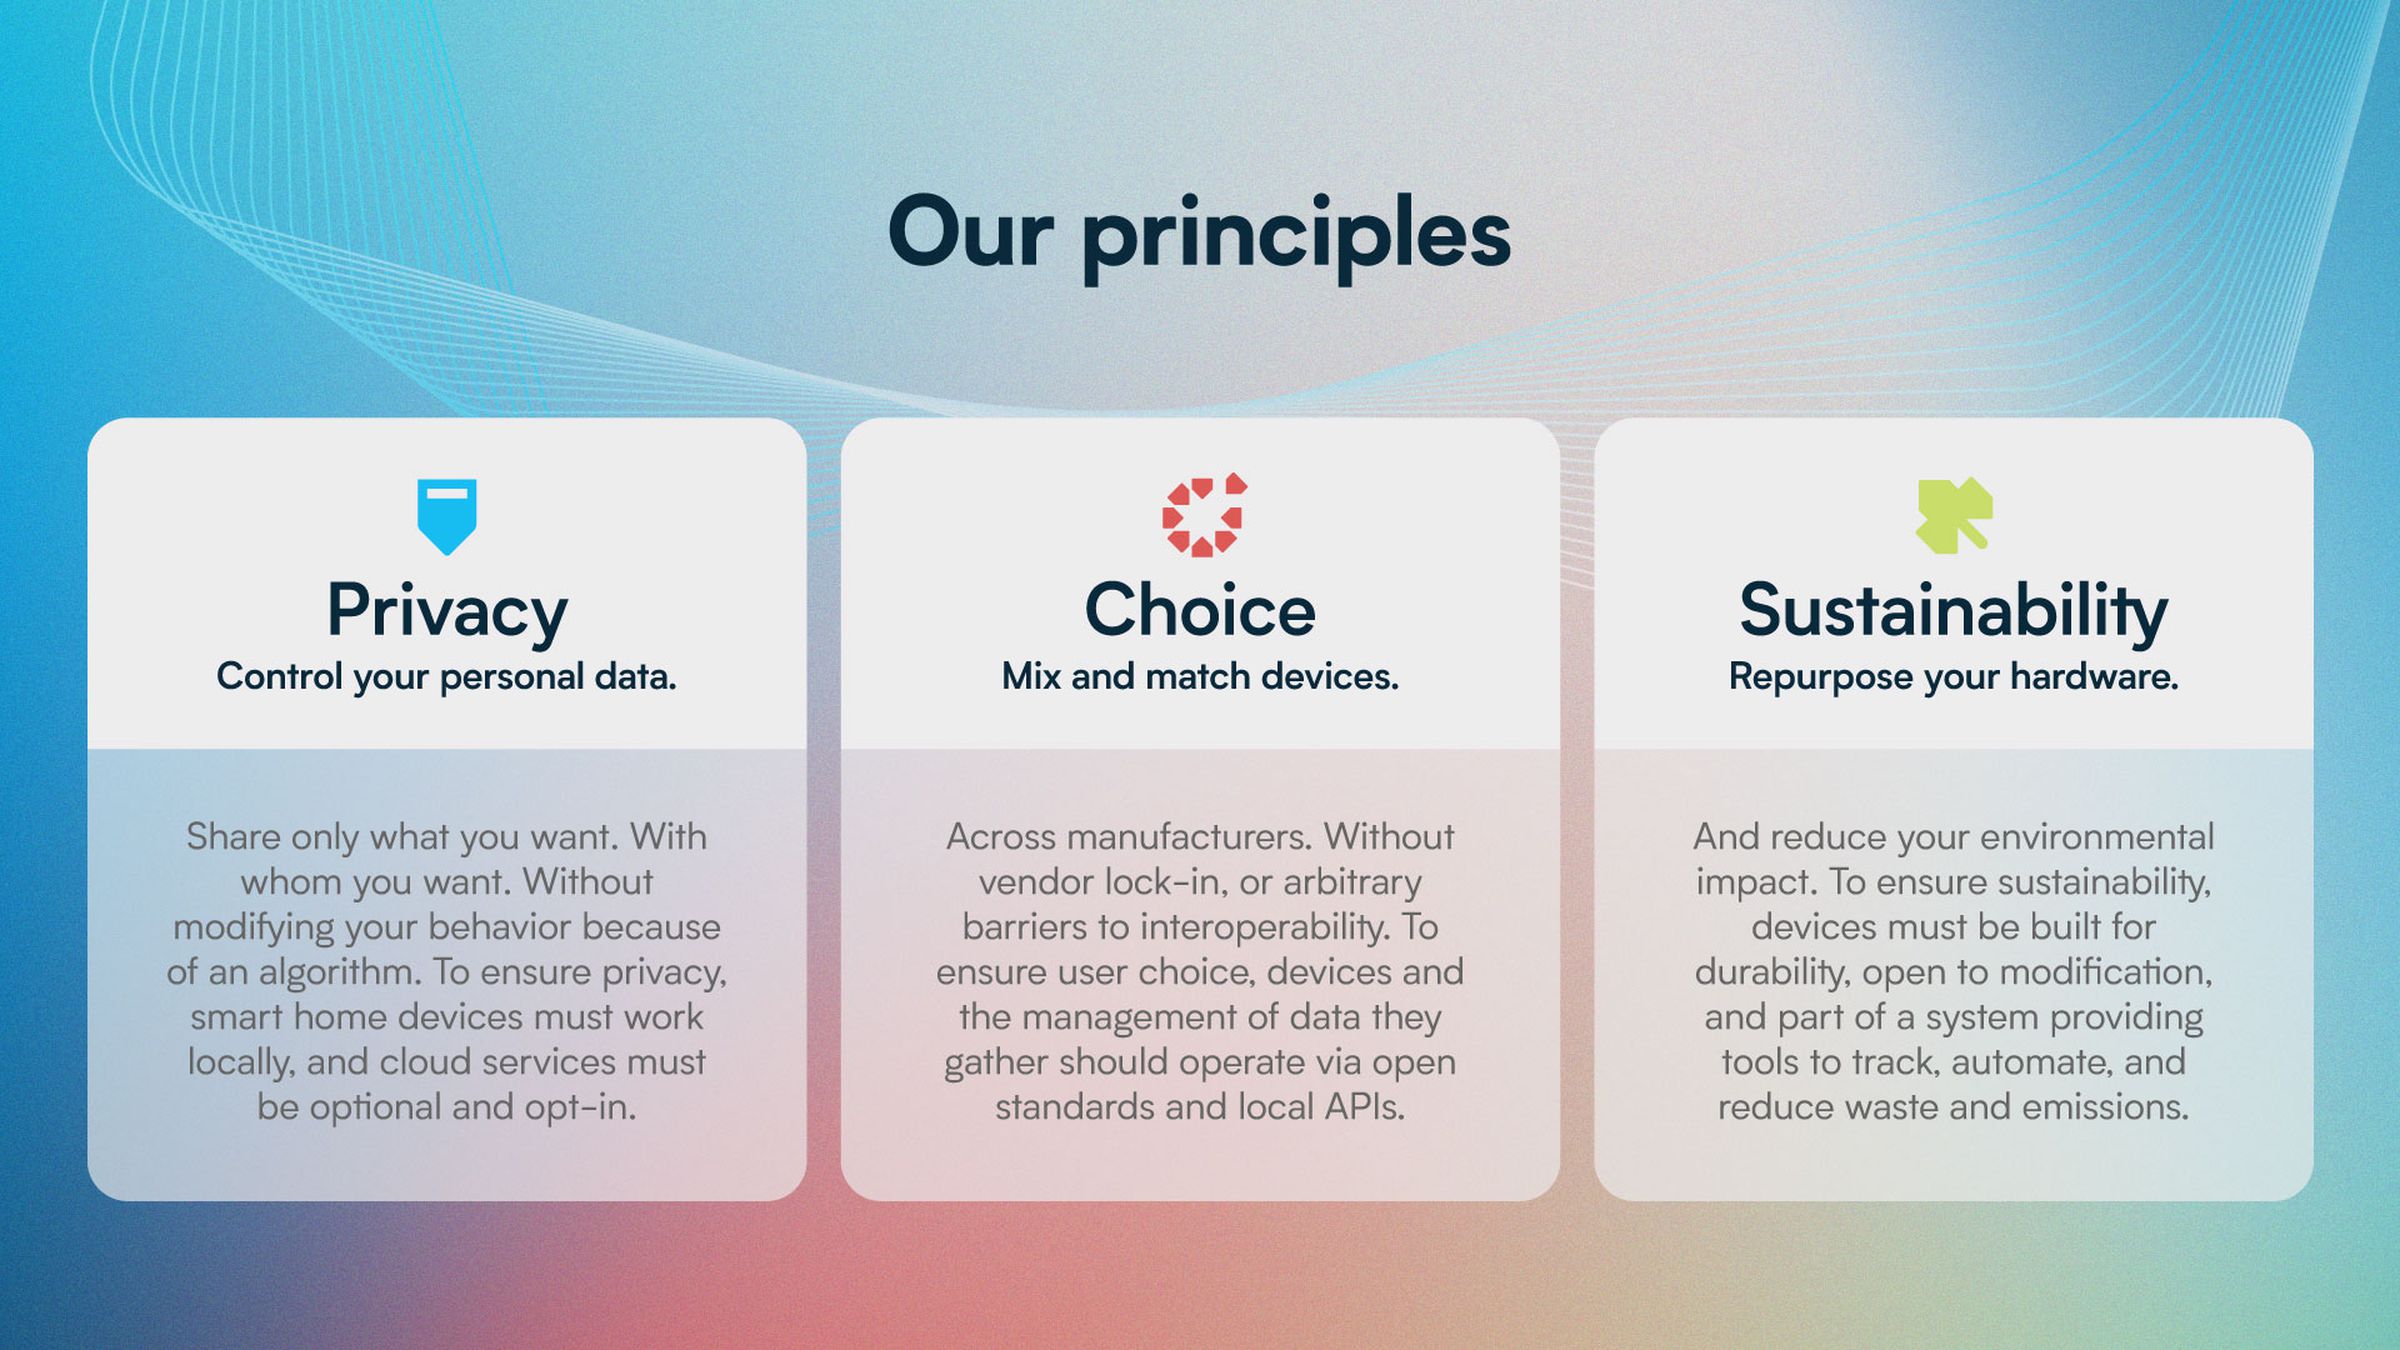 The Open Home Foundation’s principles are Privacy, Choice, and Sustainability in the smart home. 